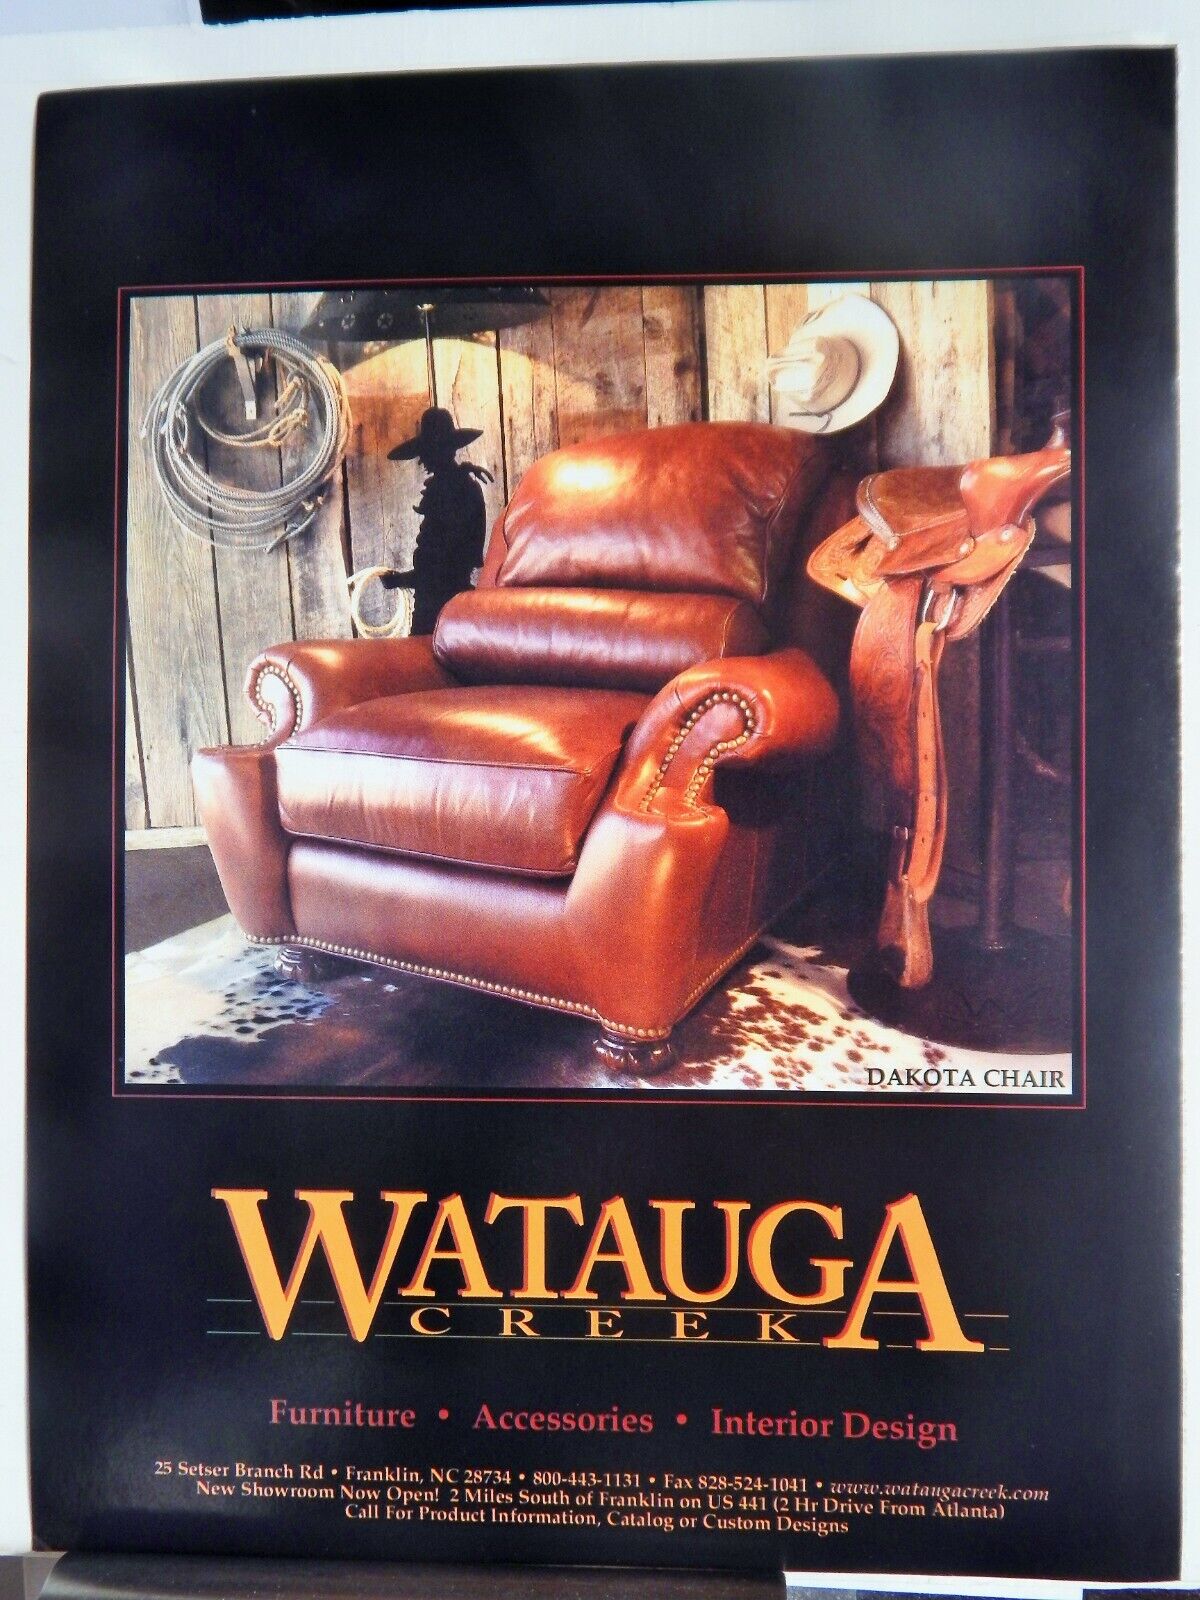 WATAUGA CREEK FURNITURE / DOUBLE-D HOME COLLECTION  VTG 2000 ADVERTISEMENT